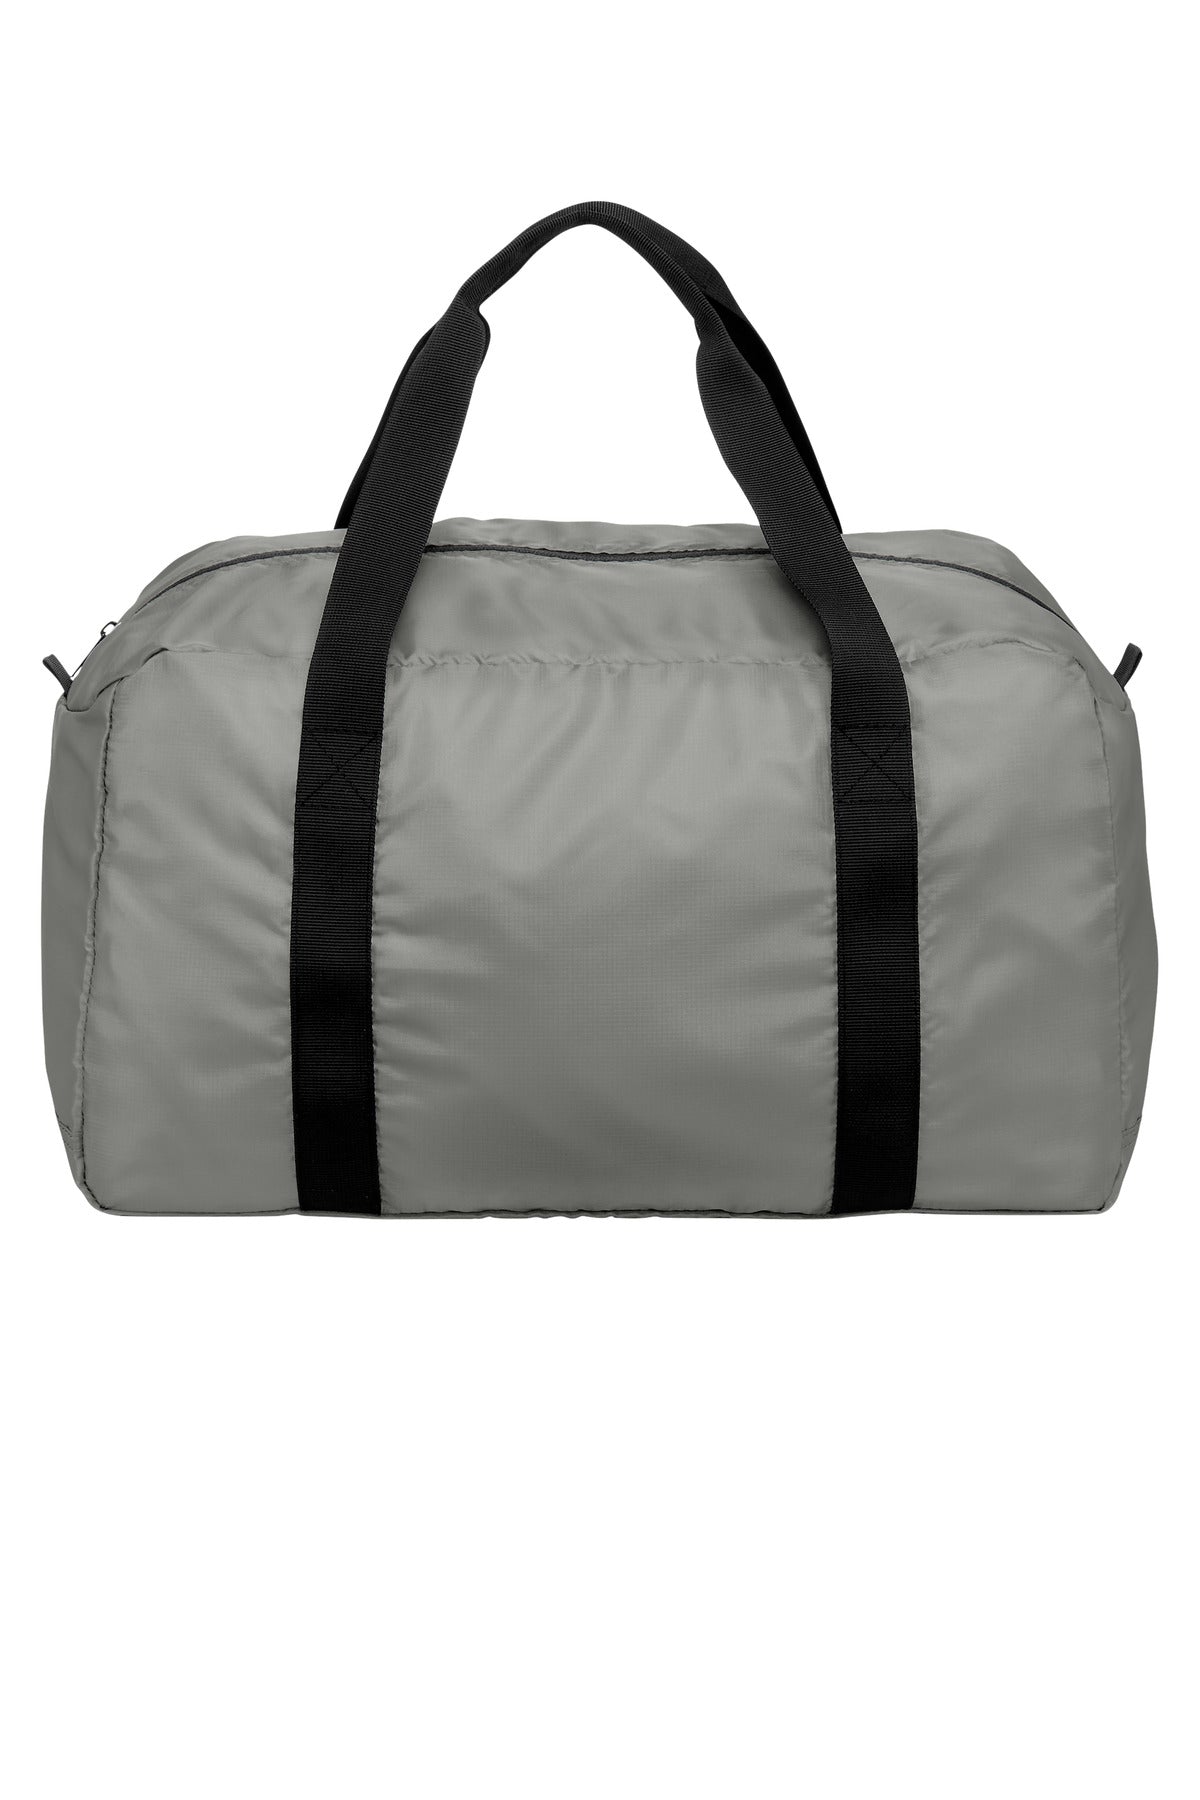 Photo of Port Authority Bags BG820  color  Gusty Grey